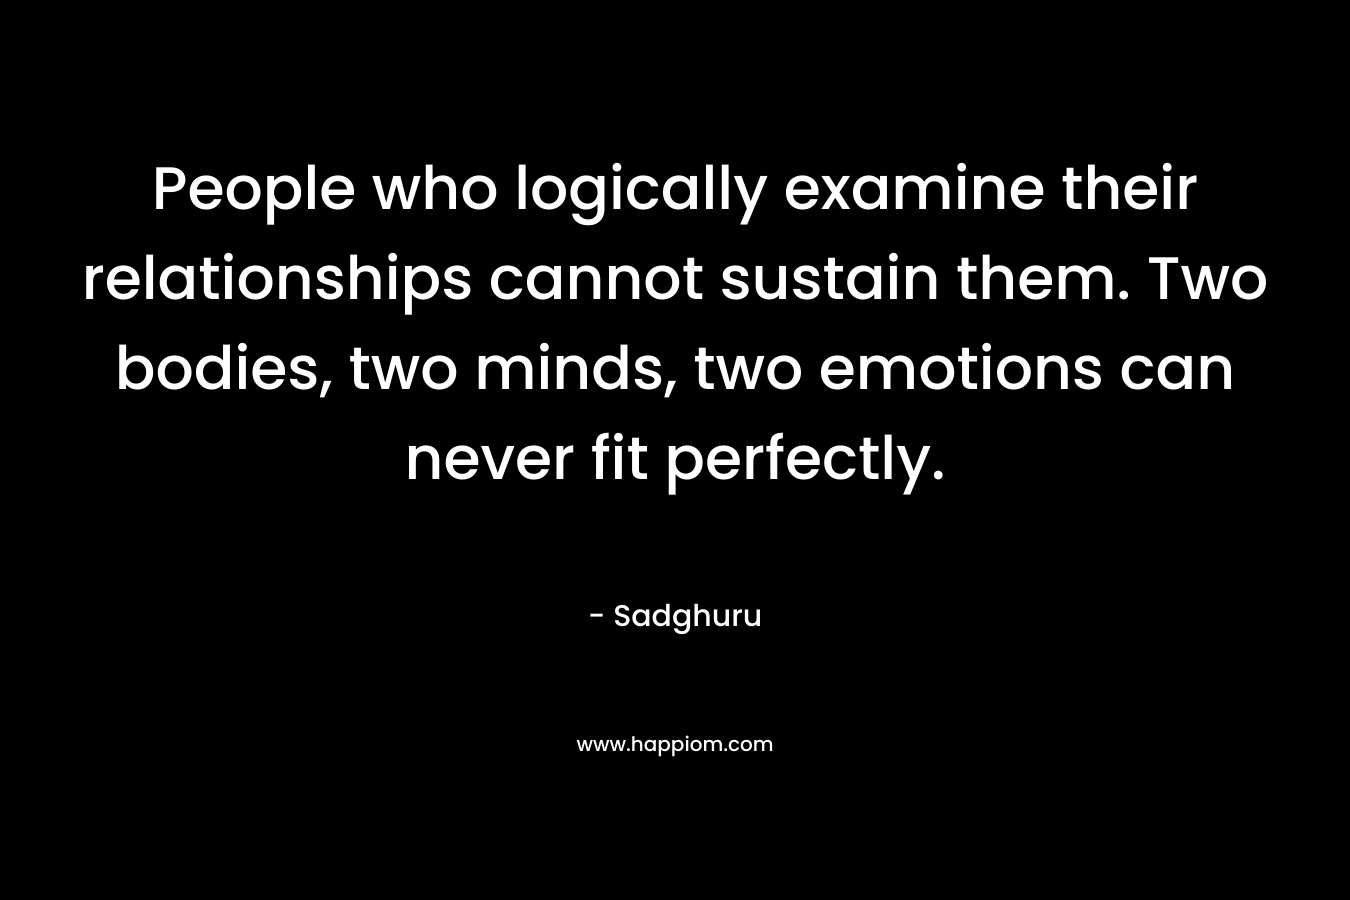 People who logically examine their relationships cannot sustain them. Two bodies, two minds, two emotions can never fit perfectly. – Sadghuru